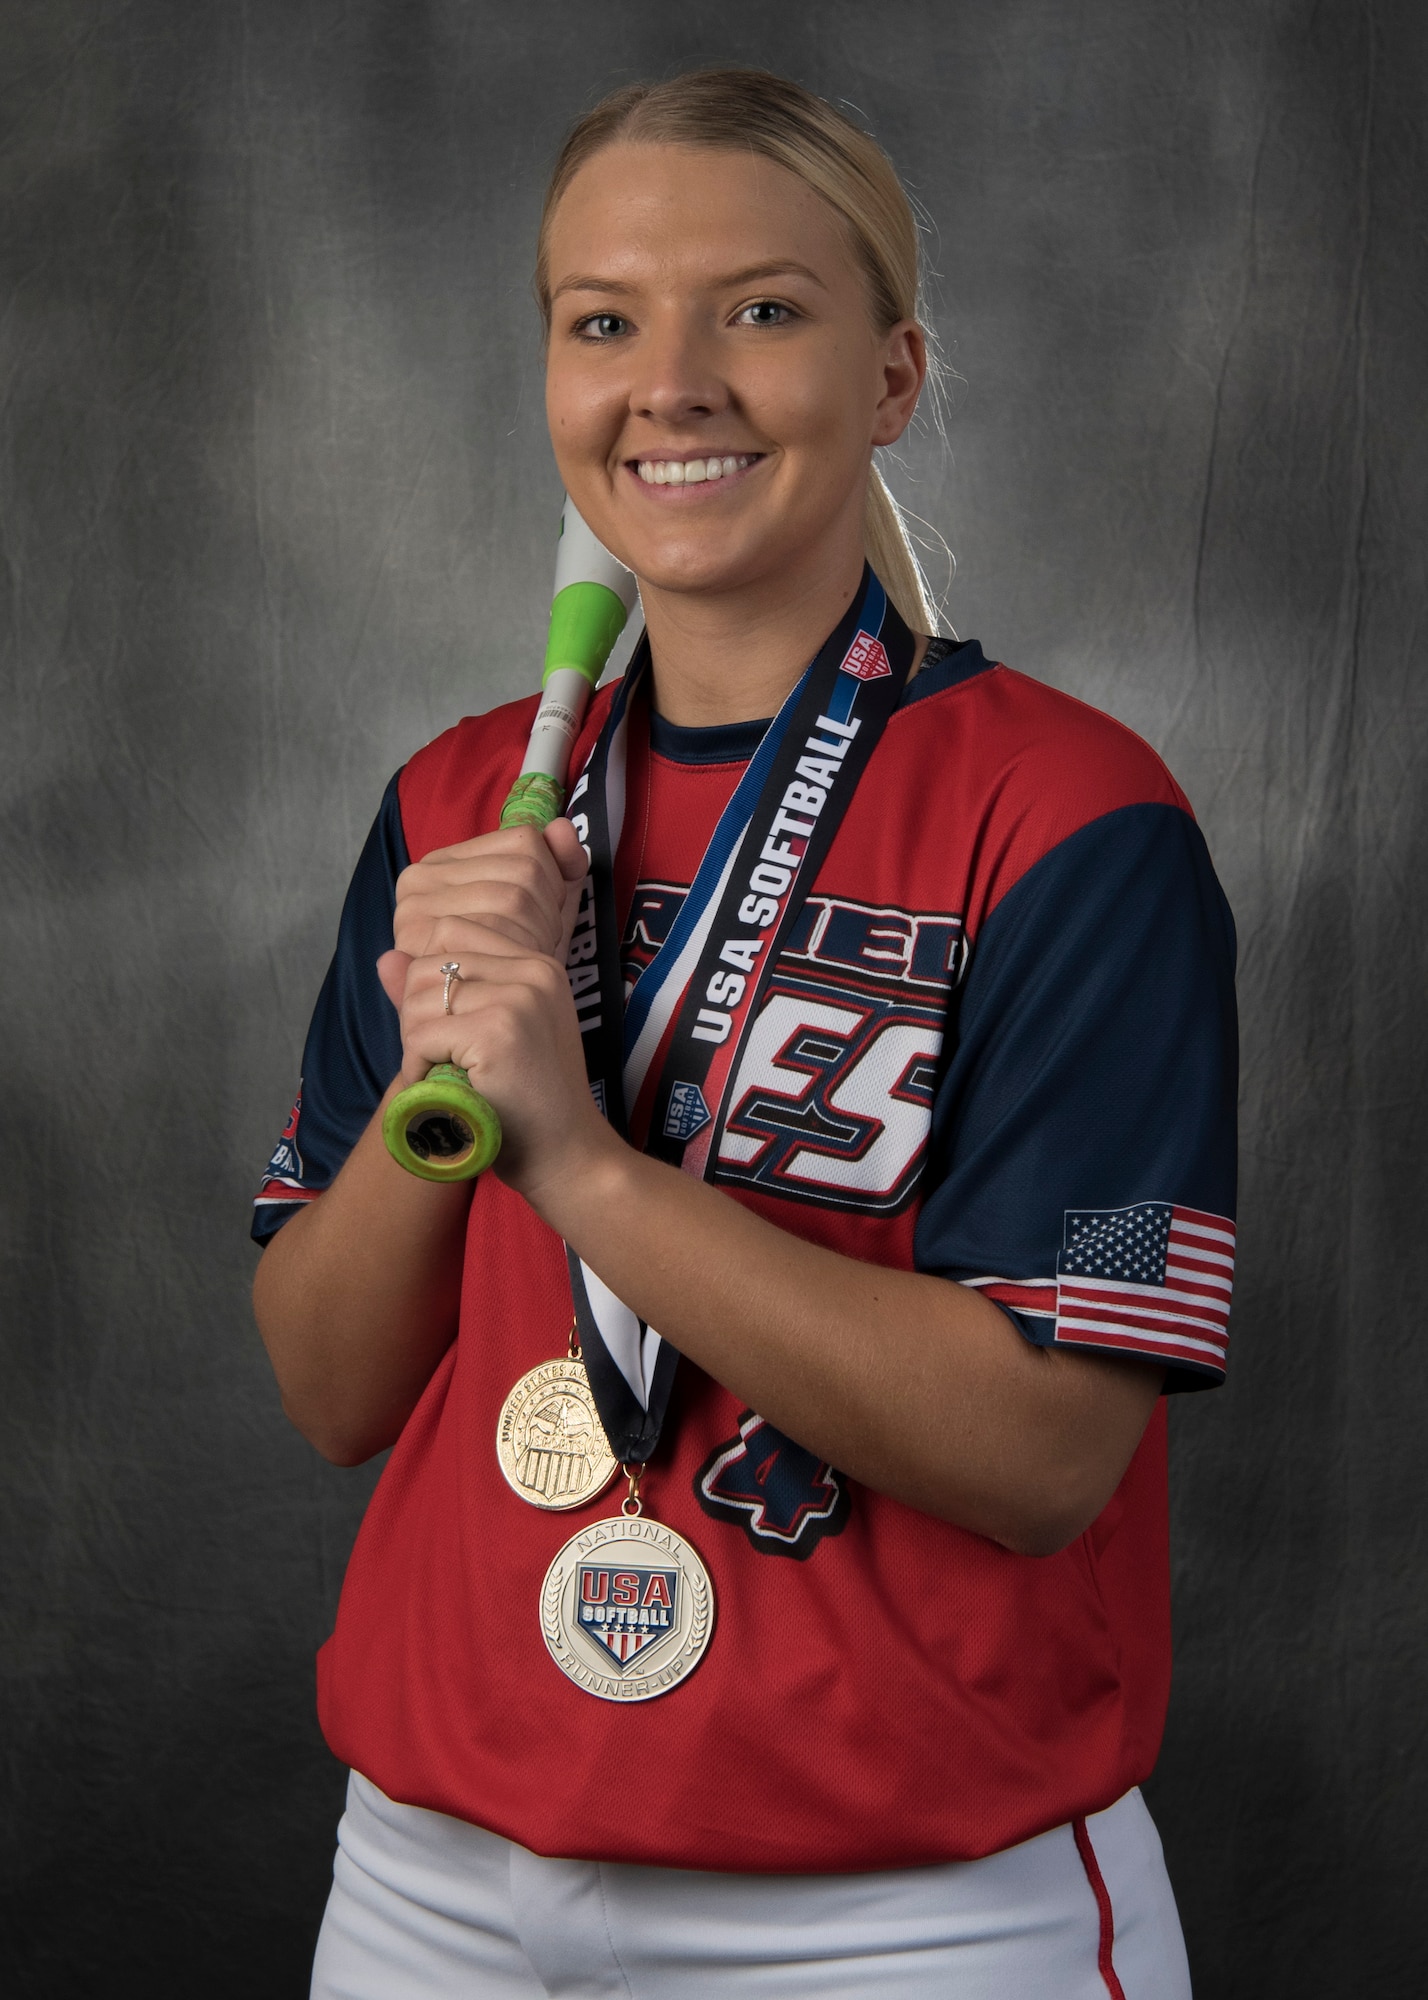 Senior Airman Tori Tilley poses for a personality portrait Oct. 4, in the Public Affairs Studio on Holloman Air Force Base, N.M. Tilley is in her U.S. Armed Forces Softball uniform with the two medals she received competing this year. (U.S. Air Force photo by Airman Autumn Vogt)